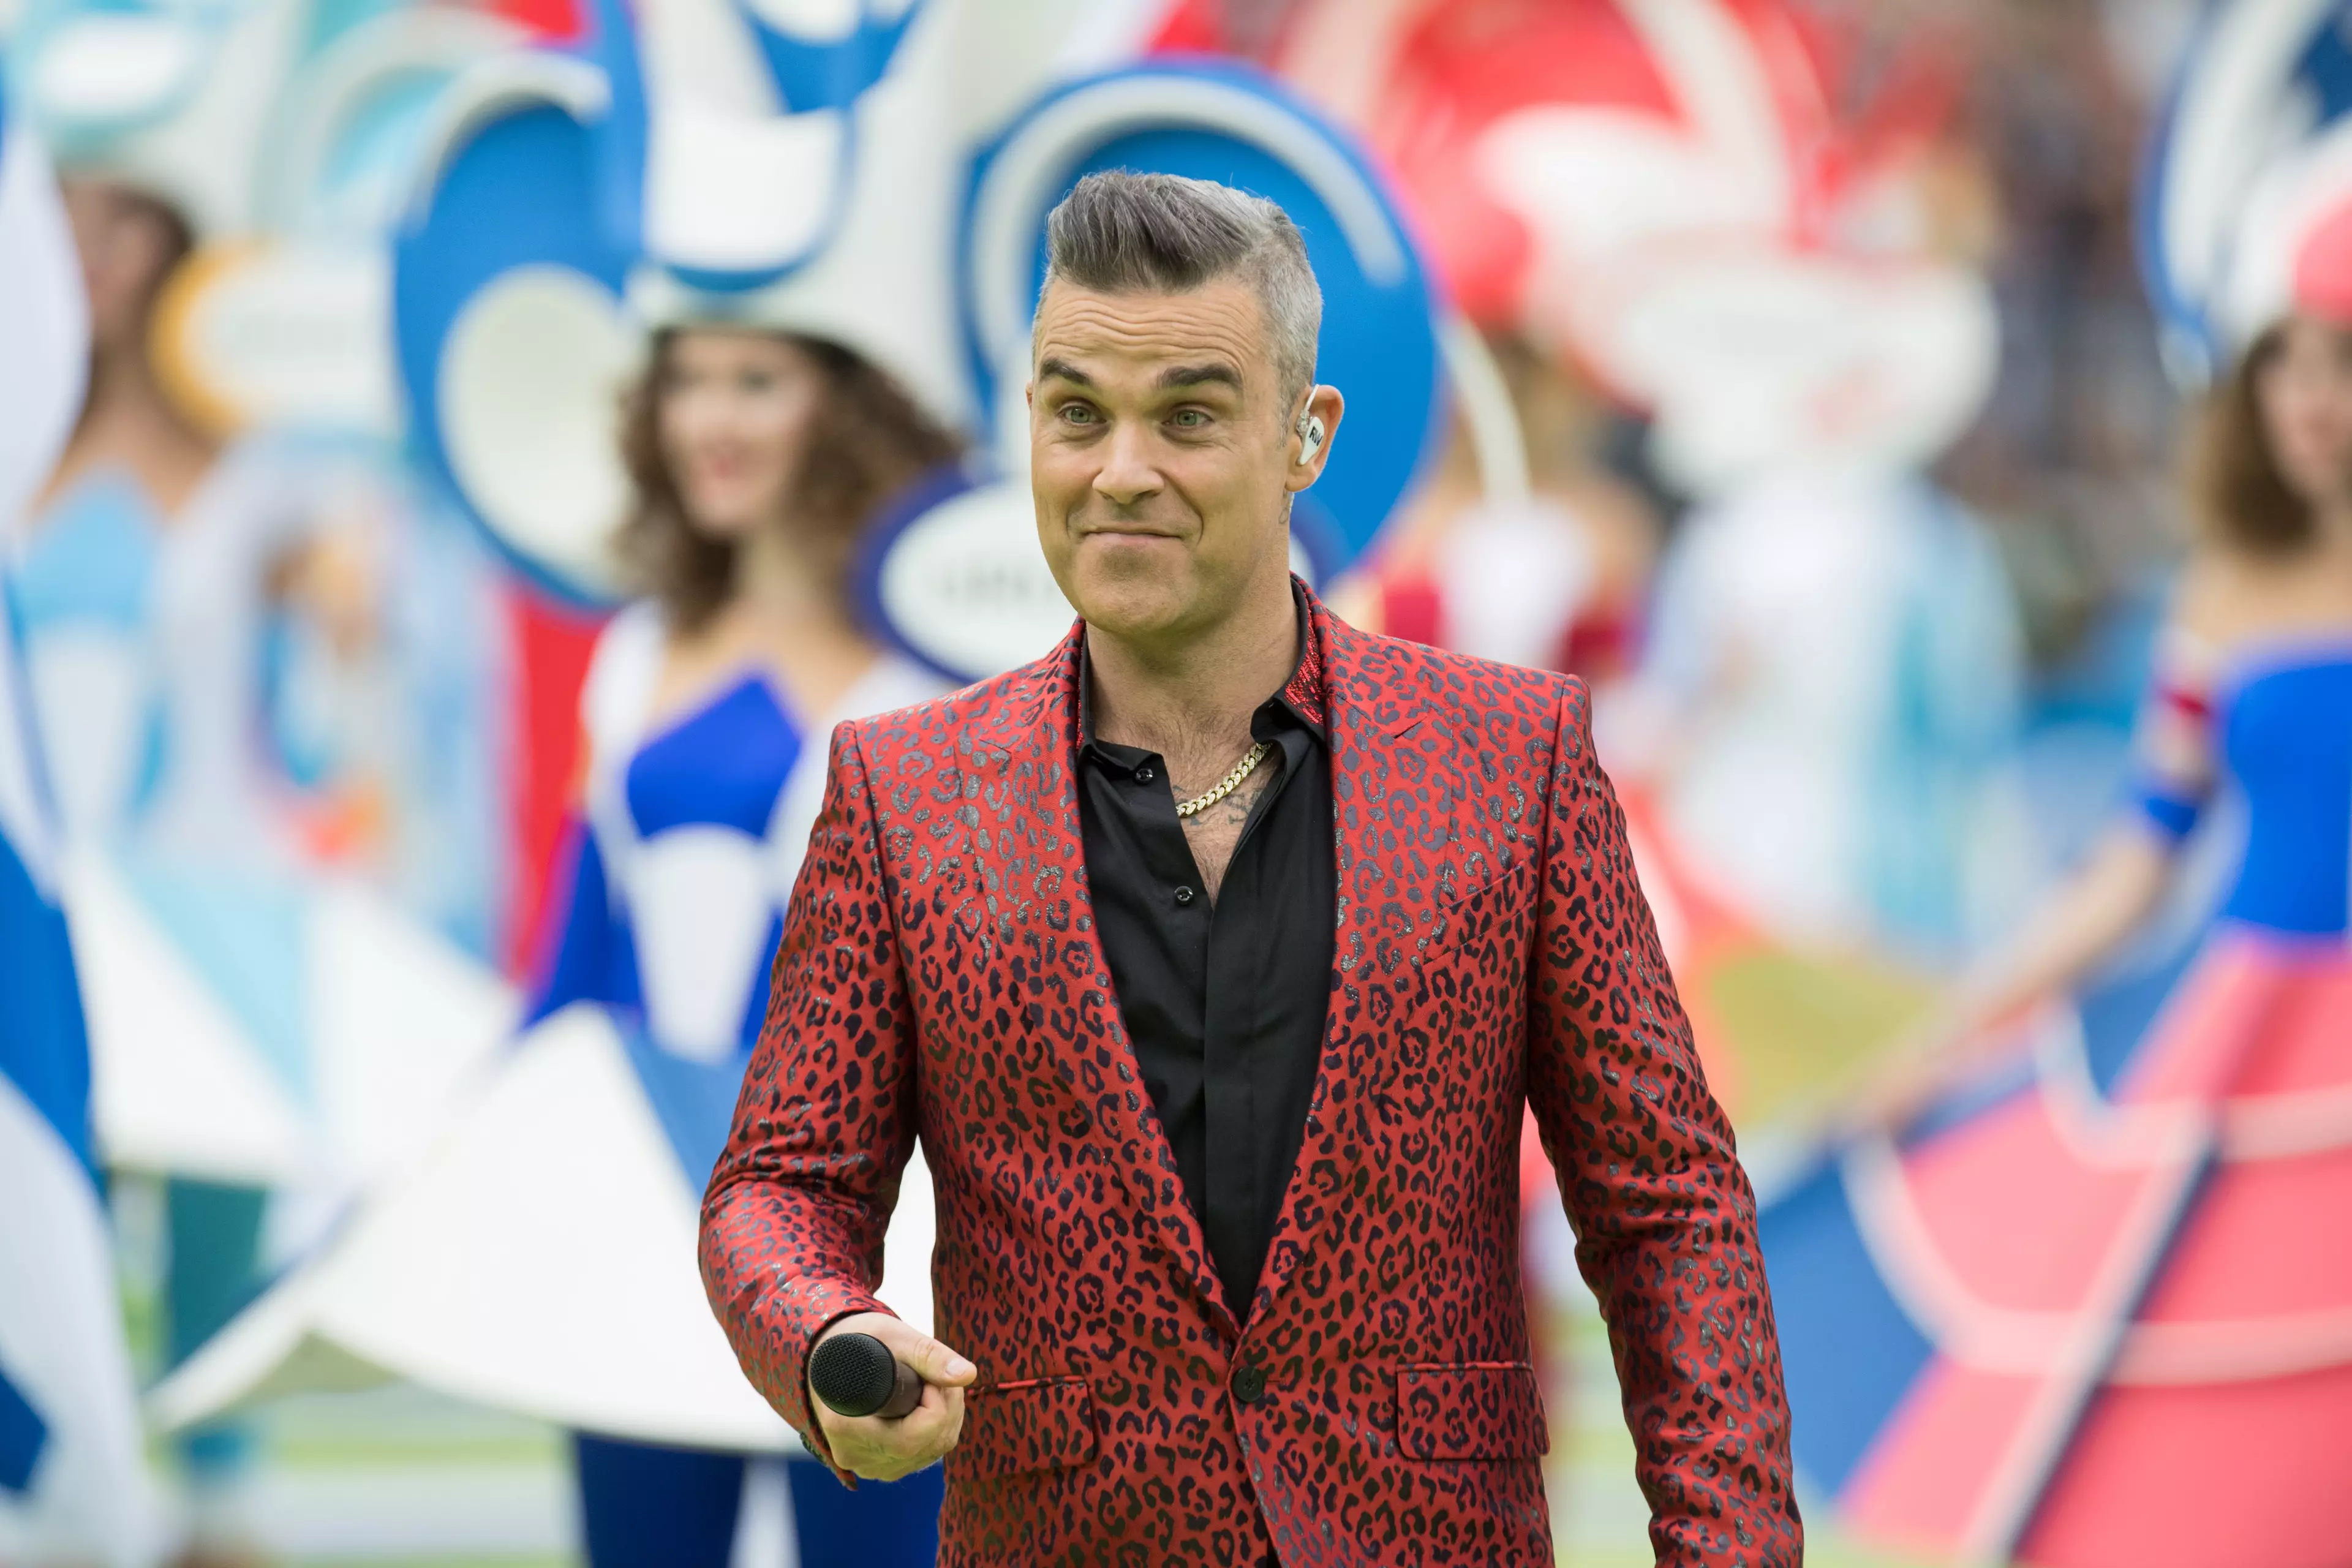 Robbie hopes his Christmas album will 'annoy' fans.